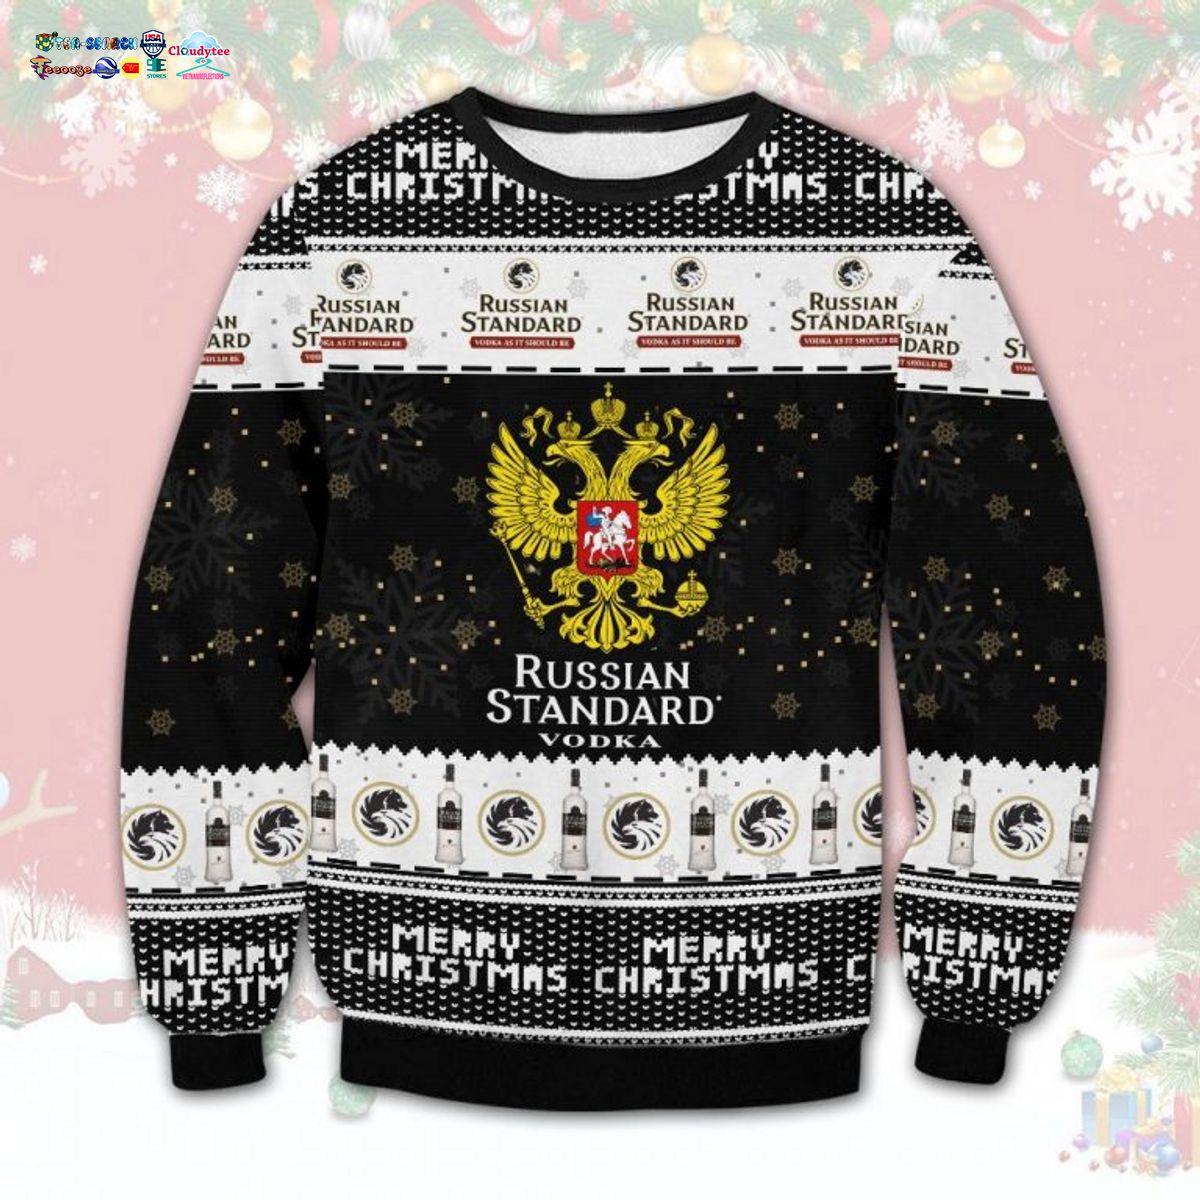 Russian Standard Vodka Ugly Christmas Sweater - Stand easy bro